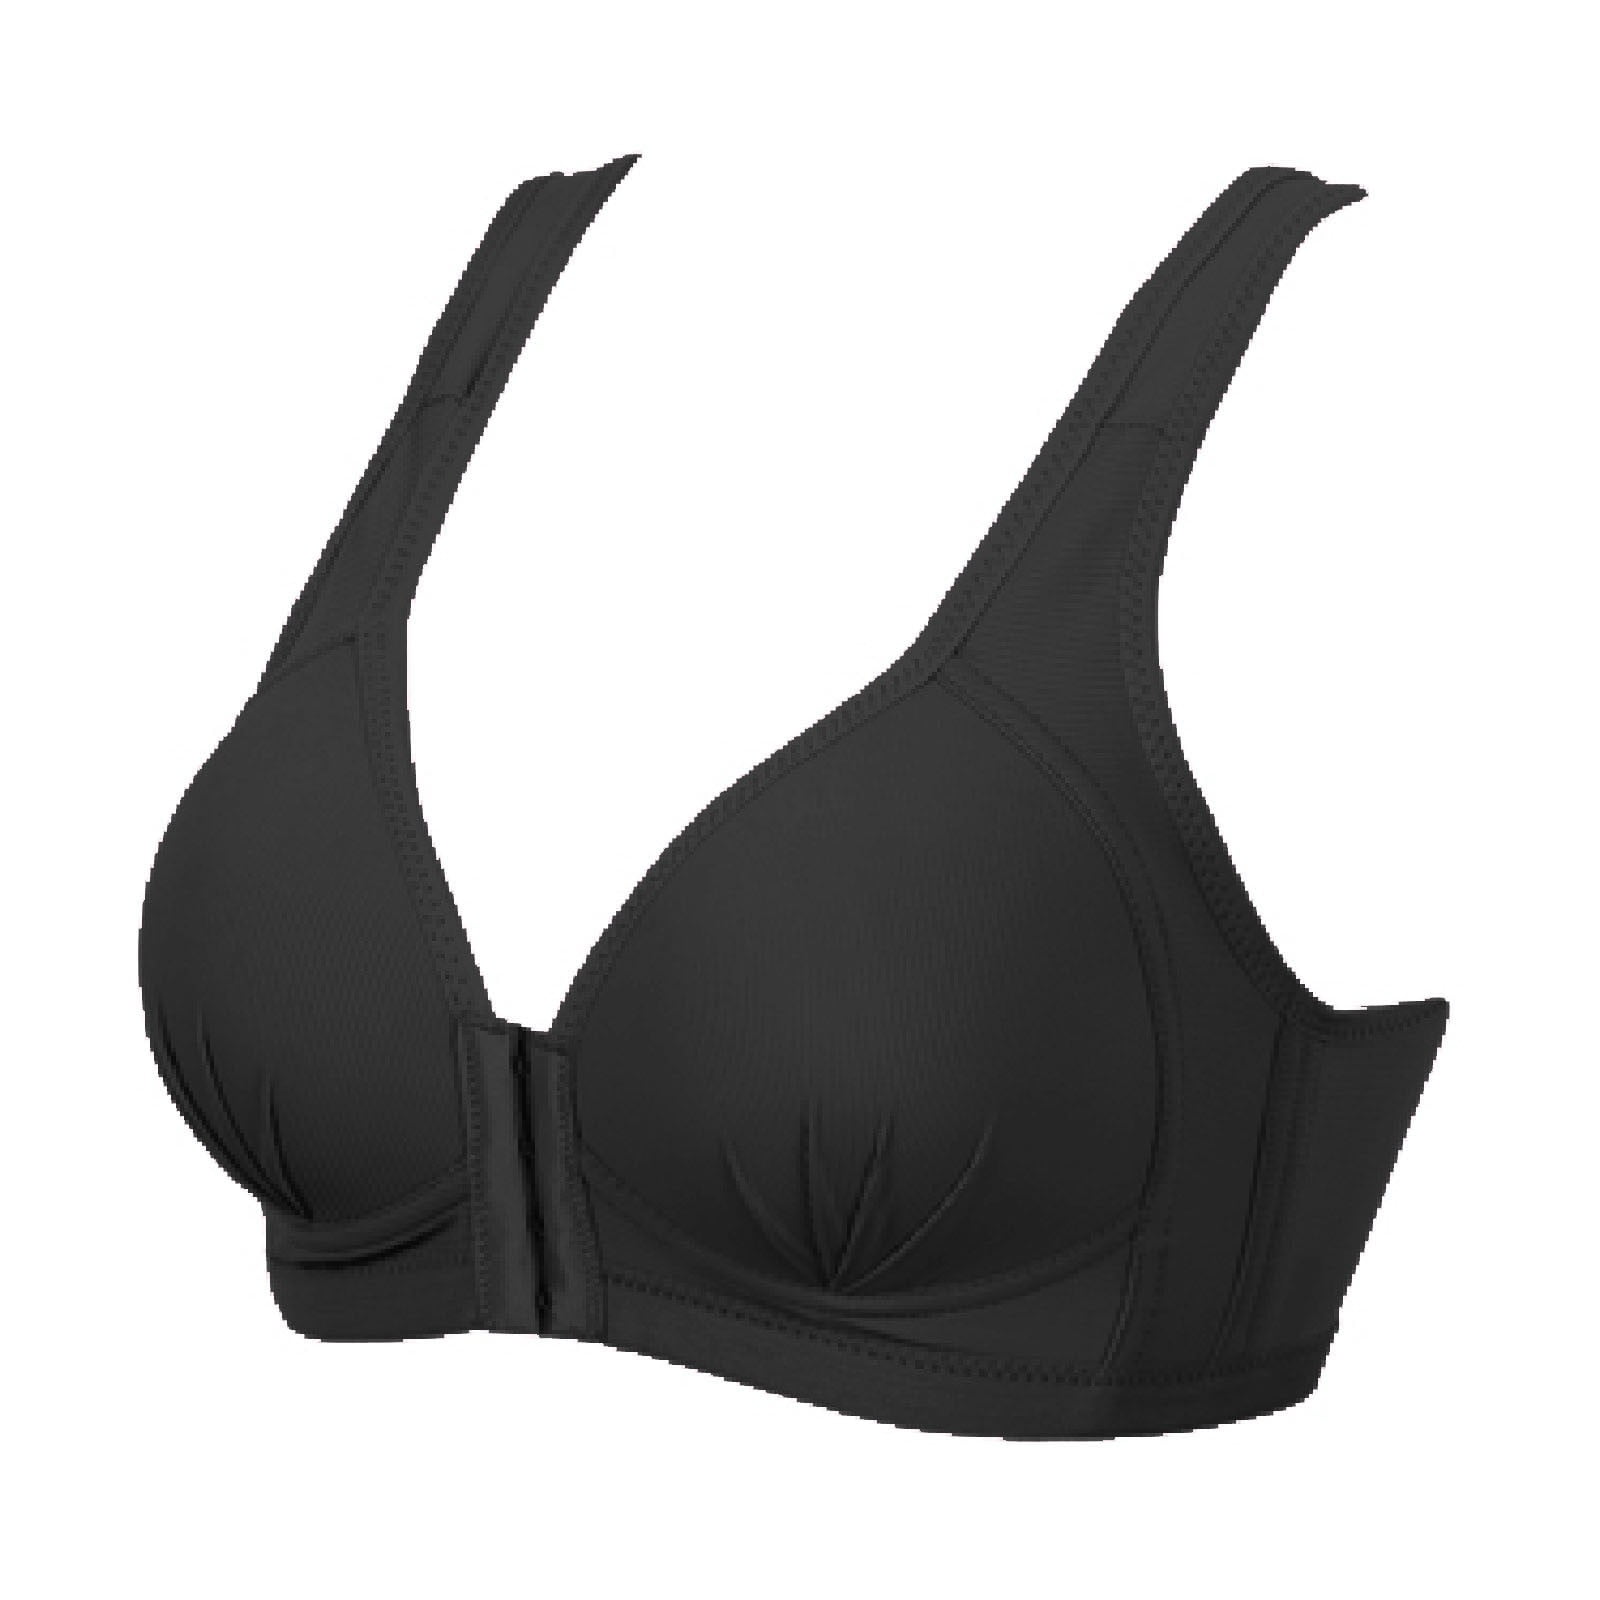 DORKASM Padded Front Closure Bras for Women High Support Padded